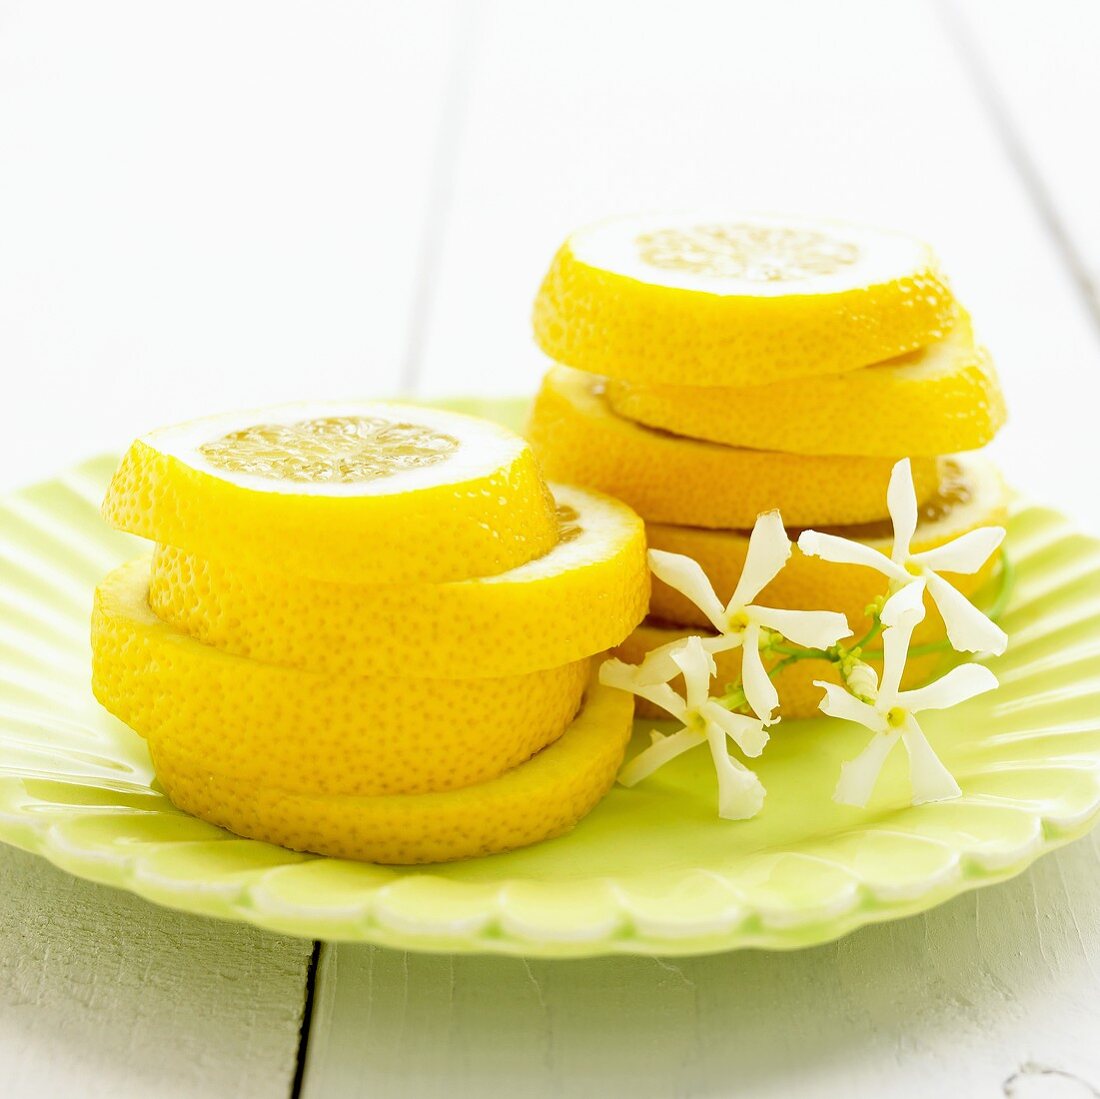 Towers of lemon slices